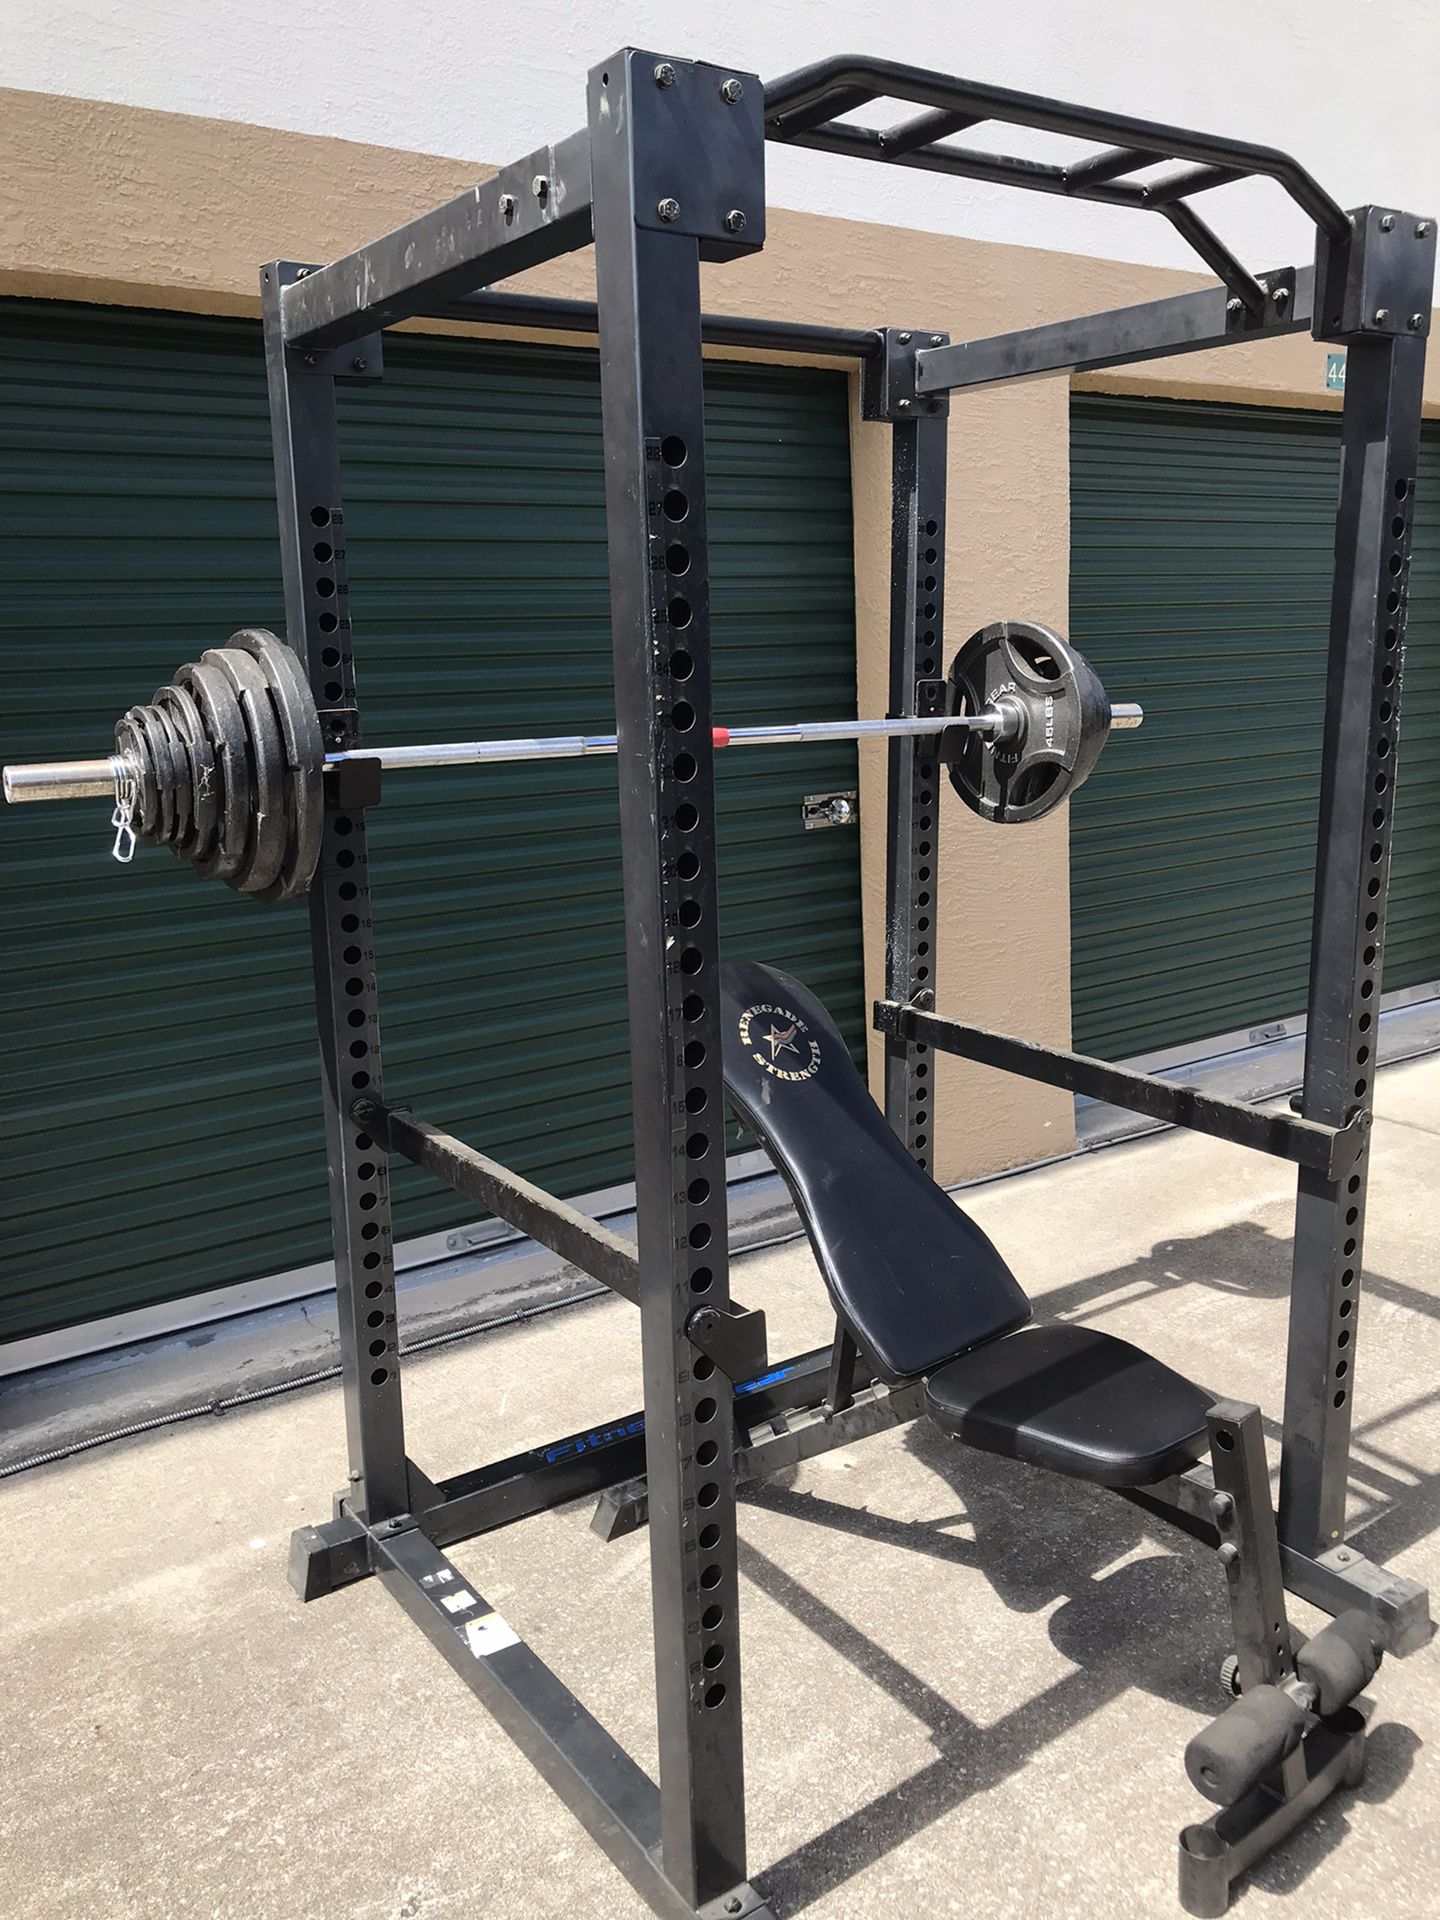 SQUAT / POWER RACK ADJUSTABLE WEIGHT BENCH AND OLYMPIC WEIGHT SET